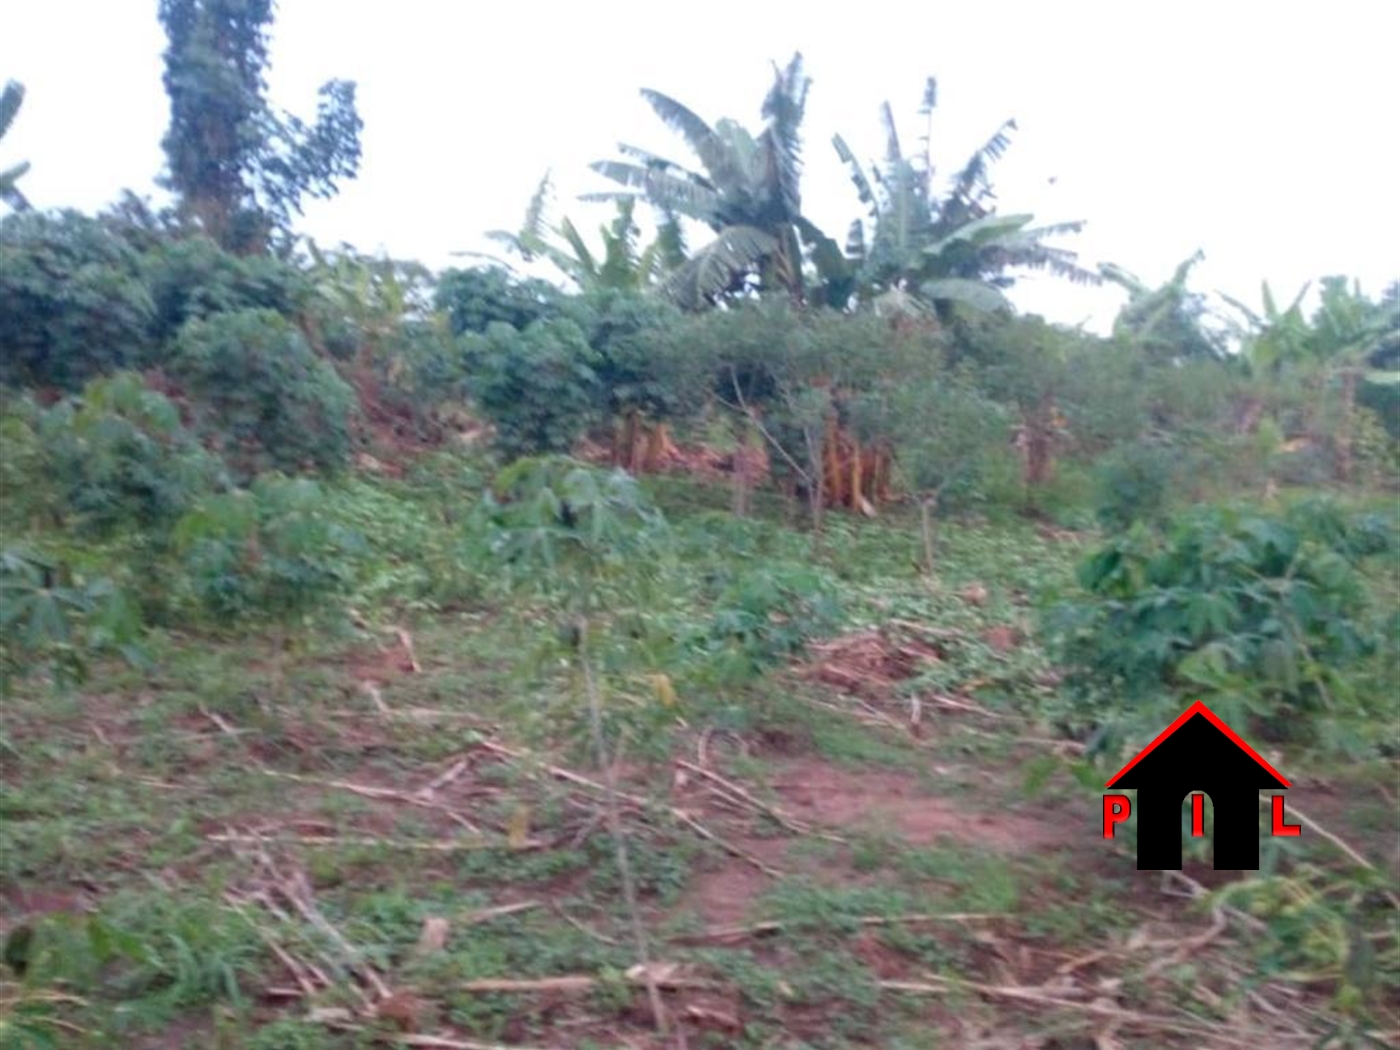 Agricultural Land for sale in Kiwanula Luweero